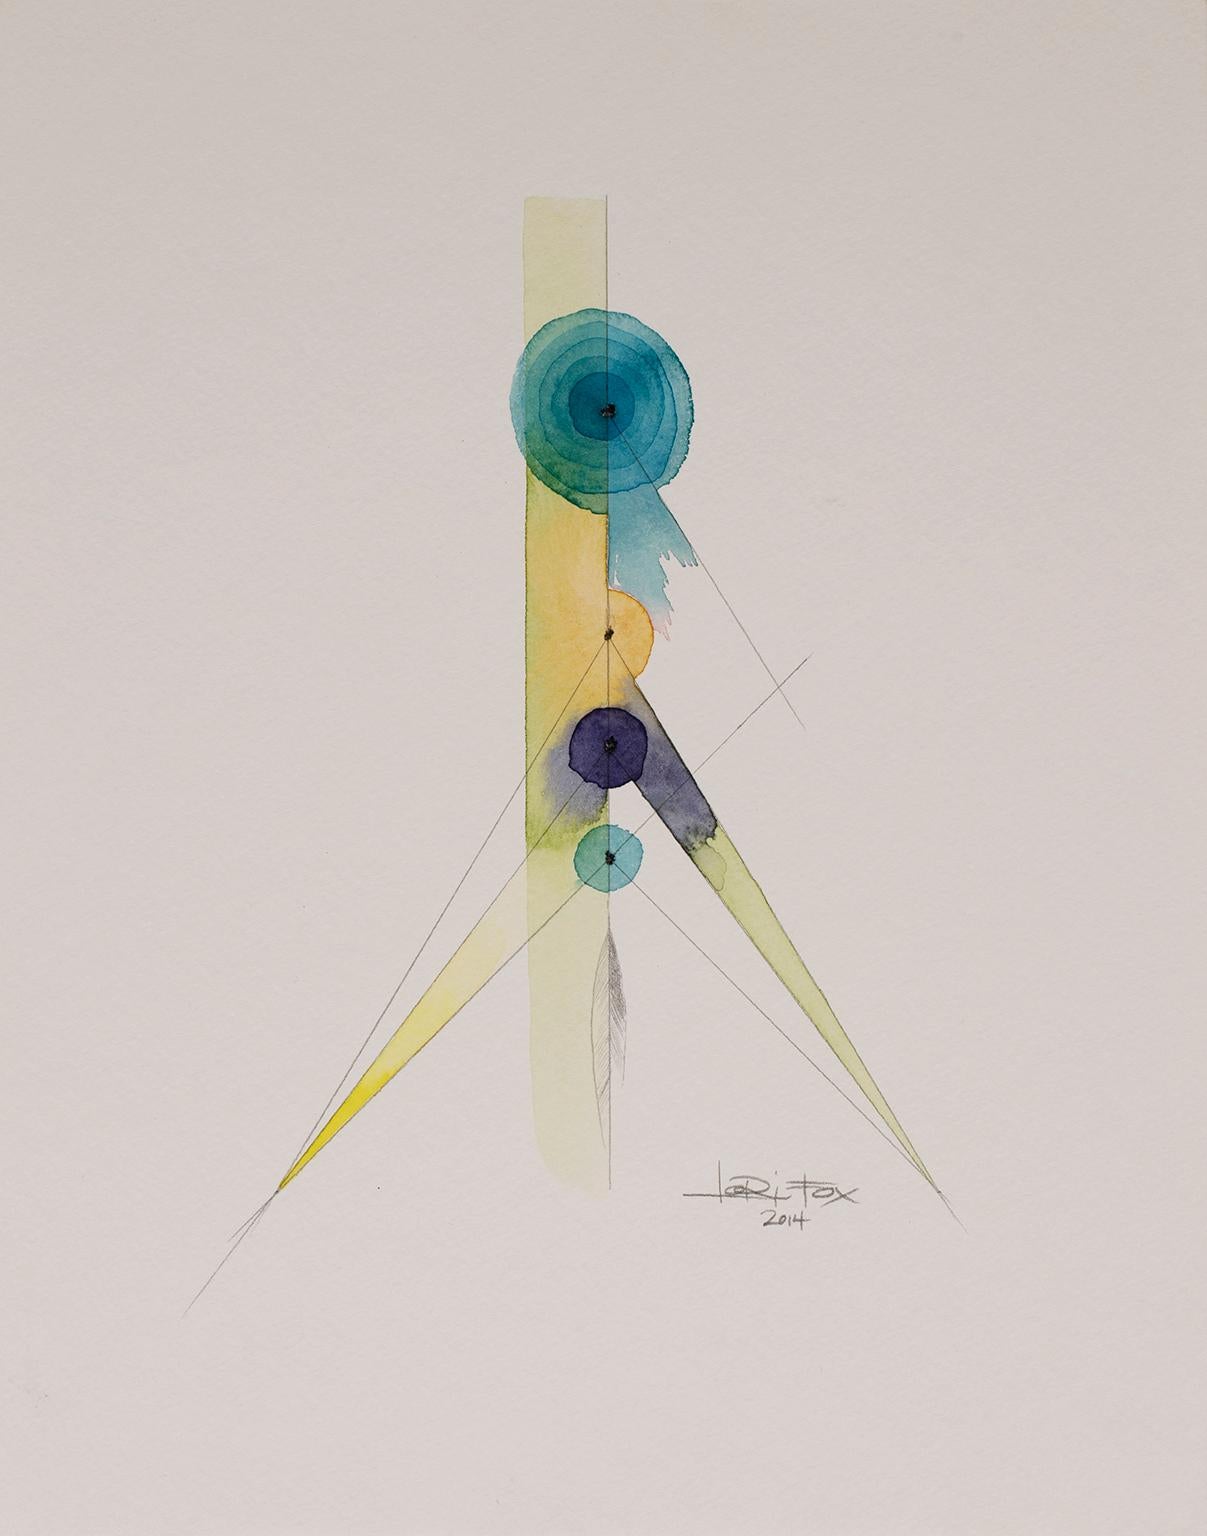 Totem 2.002, 2014 by Lori Fox
Watercolor and graphite on paper
Orginal from the Totem series.
14 x 11 inch unframed.
Framed size is 15.25 x 12.25 x 1.75 inch (ask about framed price)

Totem:  An object as an emblem of revered symbol.

In this second